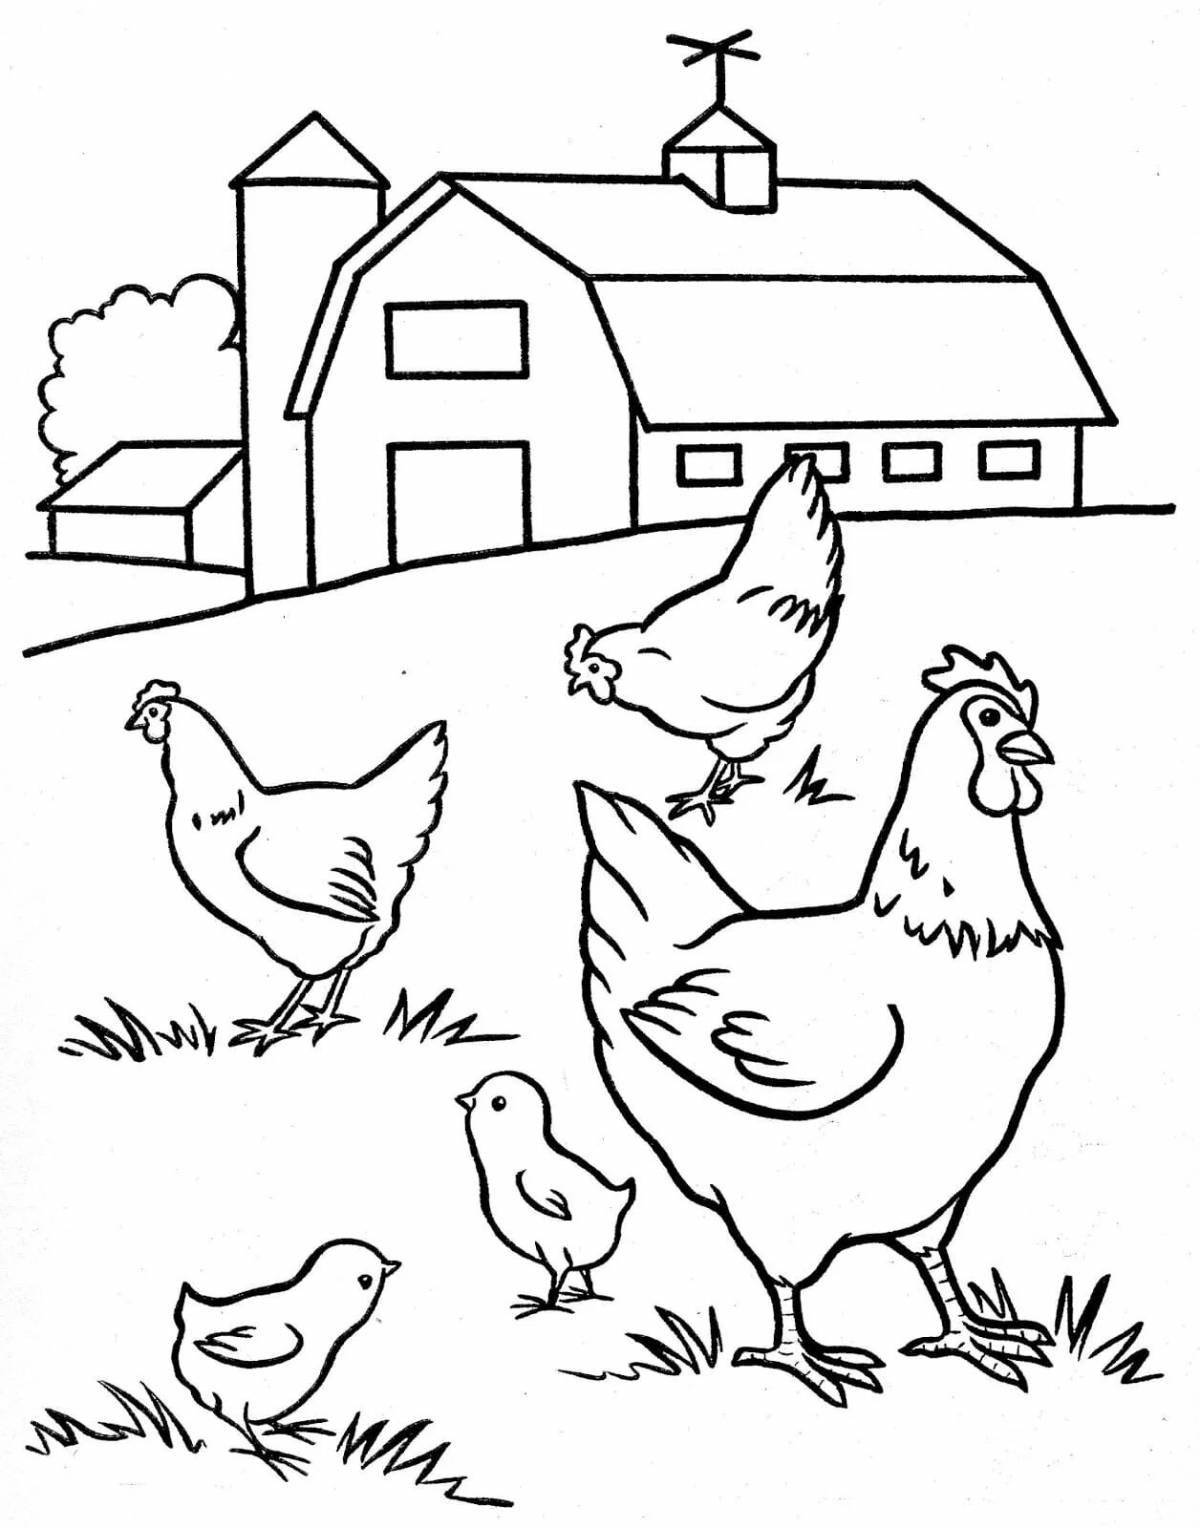 Brilliant bird yard coloring page for students